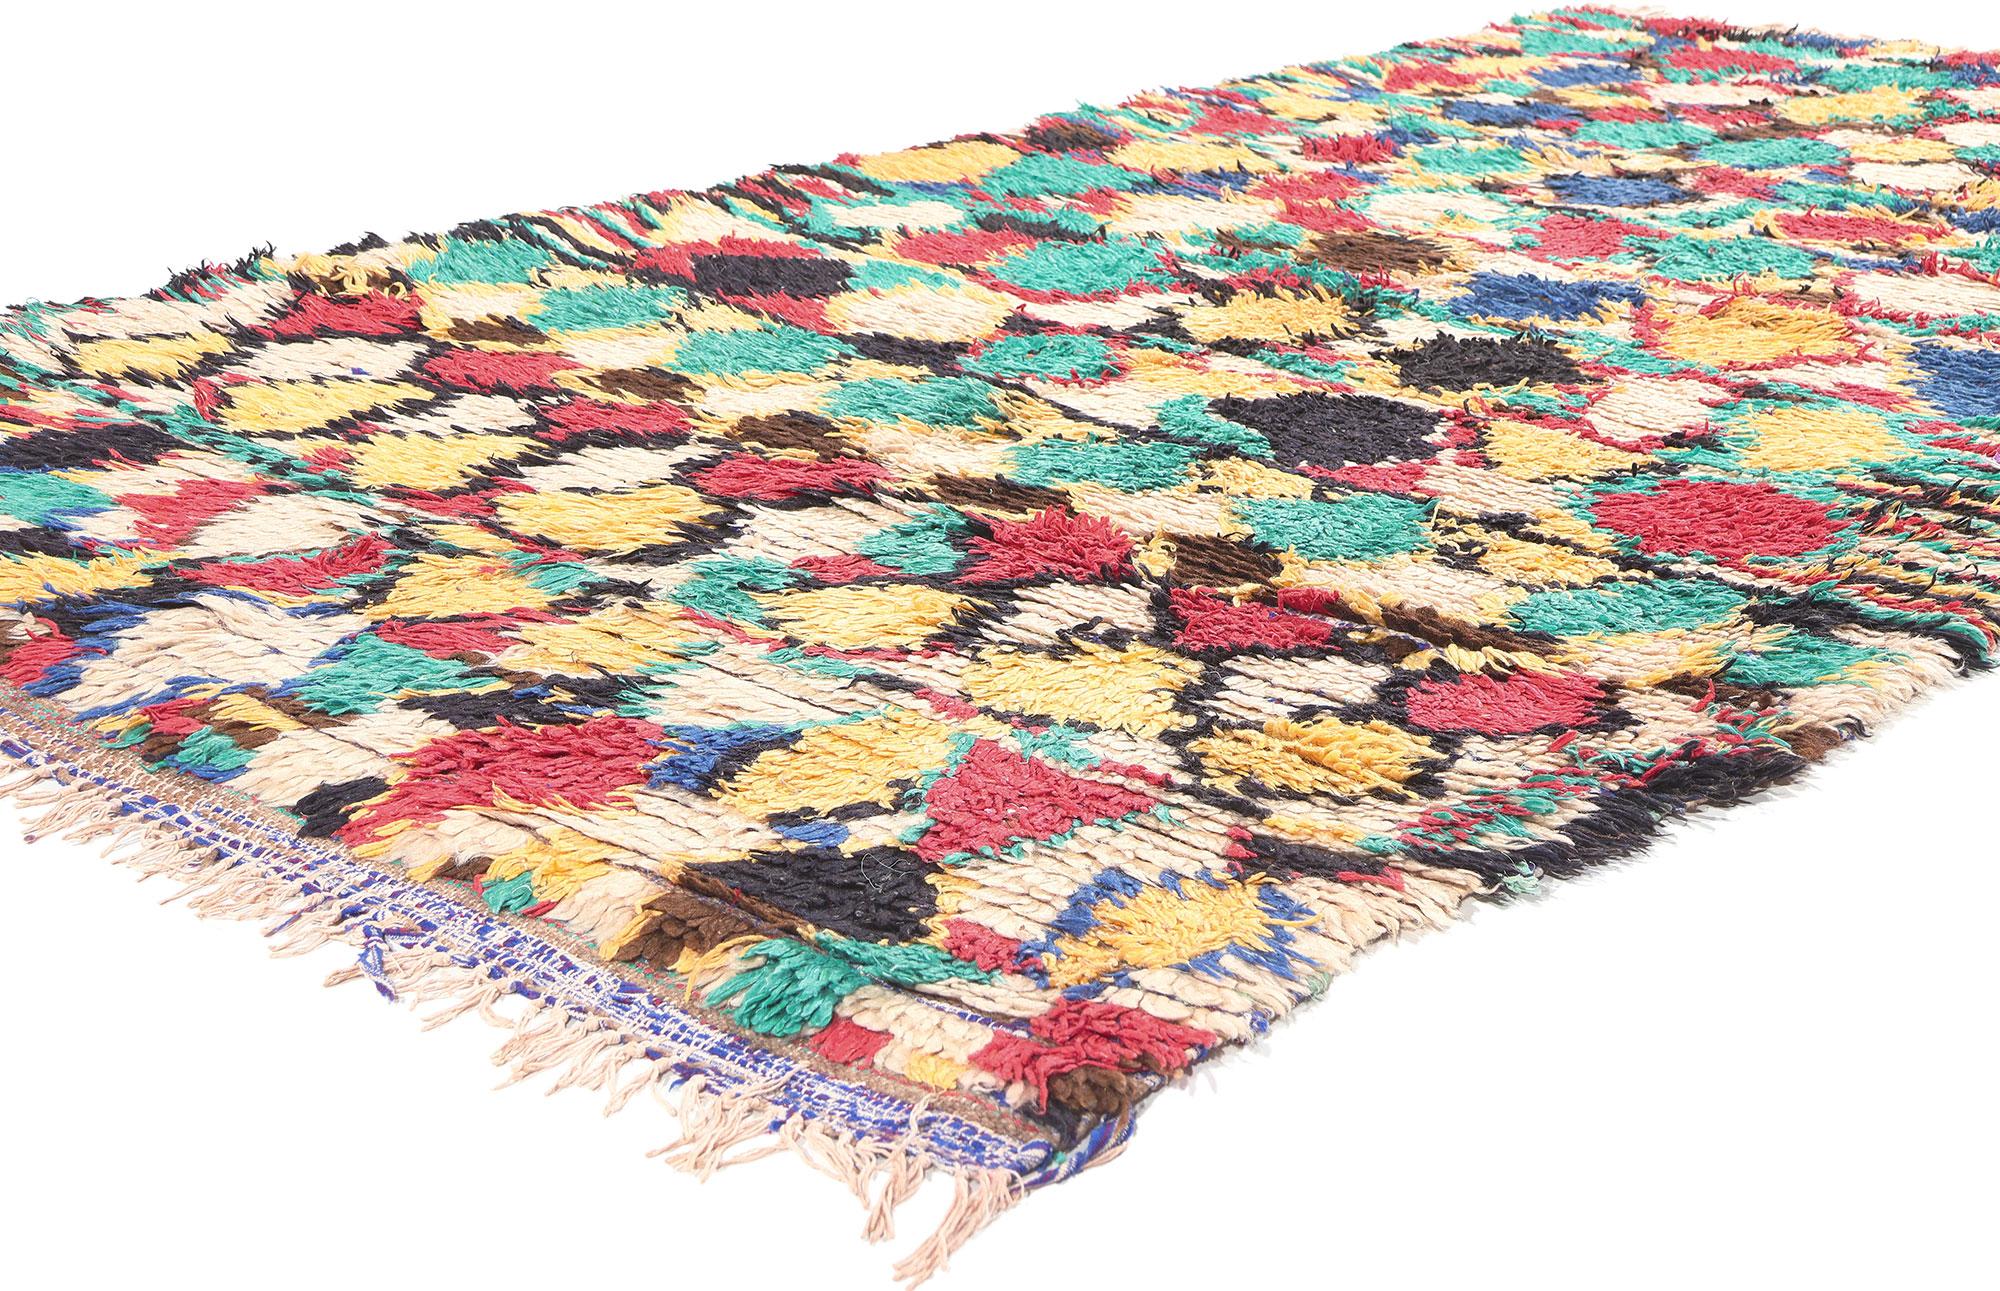 20516 Vintage Boucherouite Moroccan Azilal Rag Rug, 04'08 x 09'01. 

From the provincial capital of central Morocco in the High Atlas Mountains emerges the vibrant legacy of Azila rugs, a distinctive type of Berber rug celebrated for its geometric